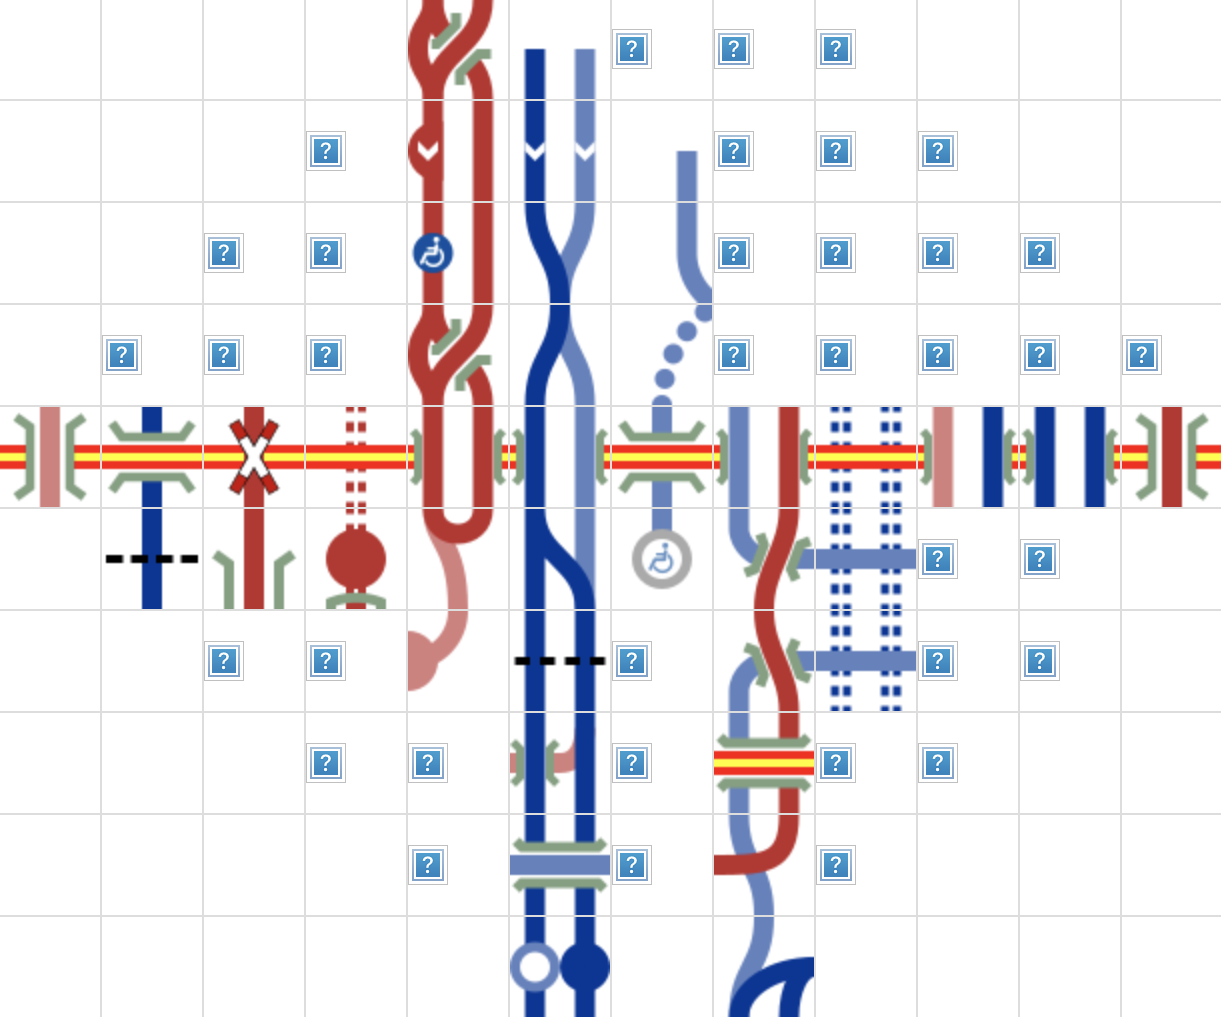 A partially filled grid of icons showing a road and some rail lines